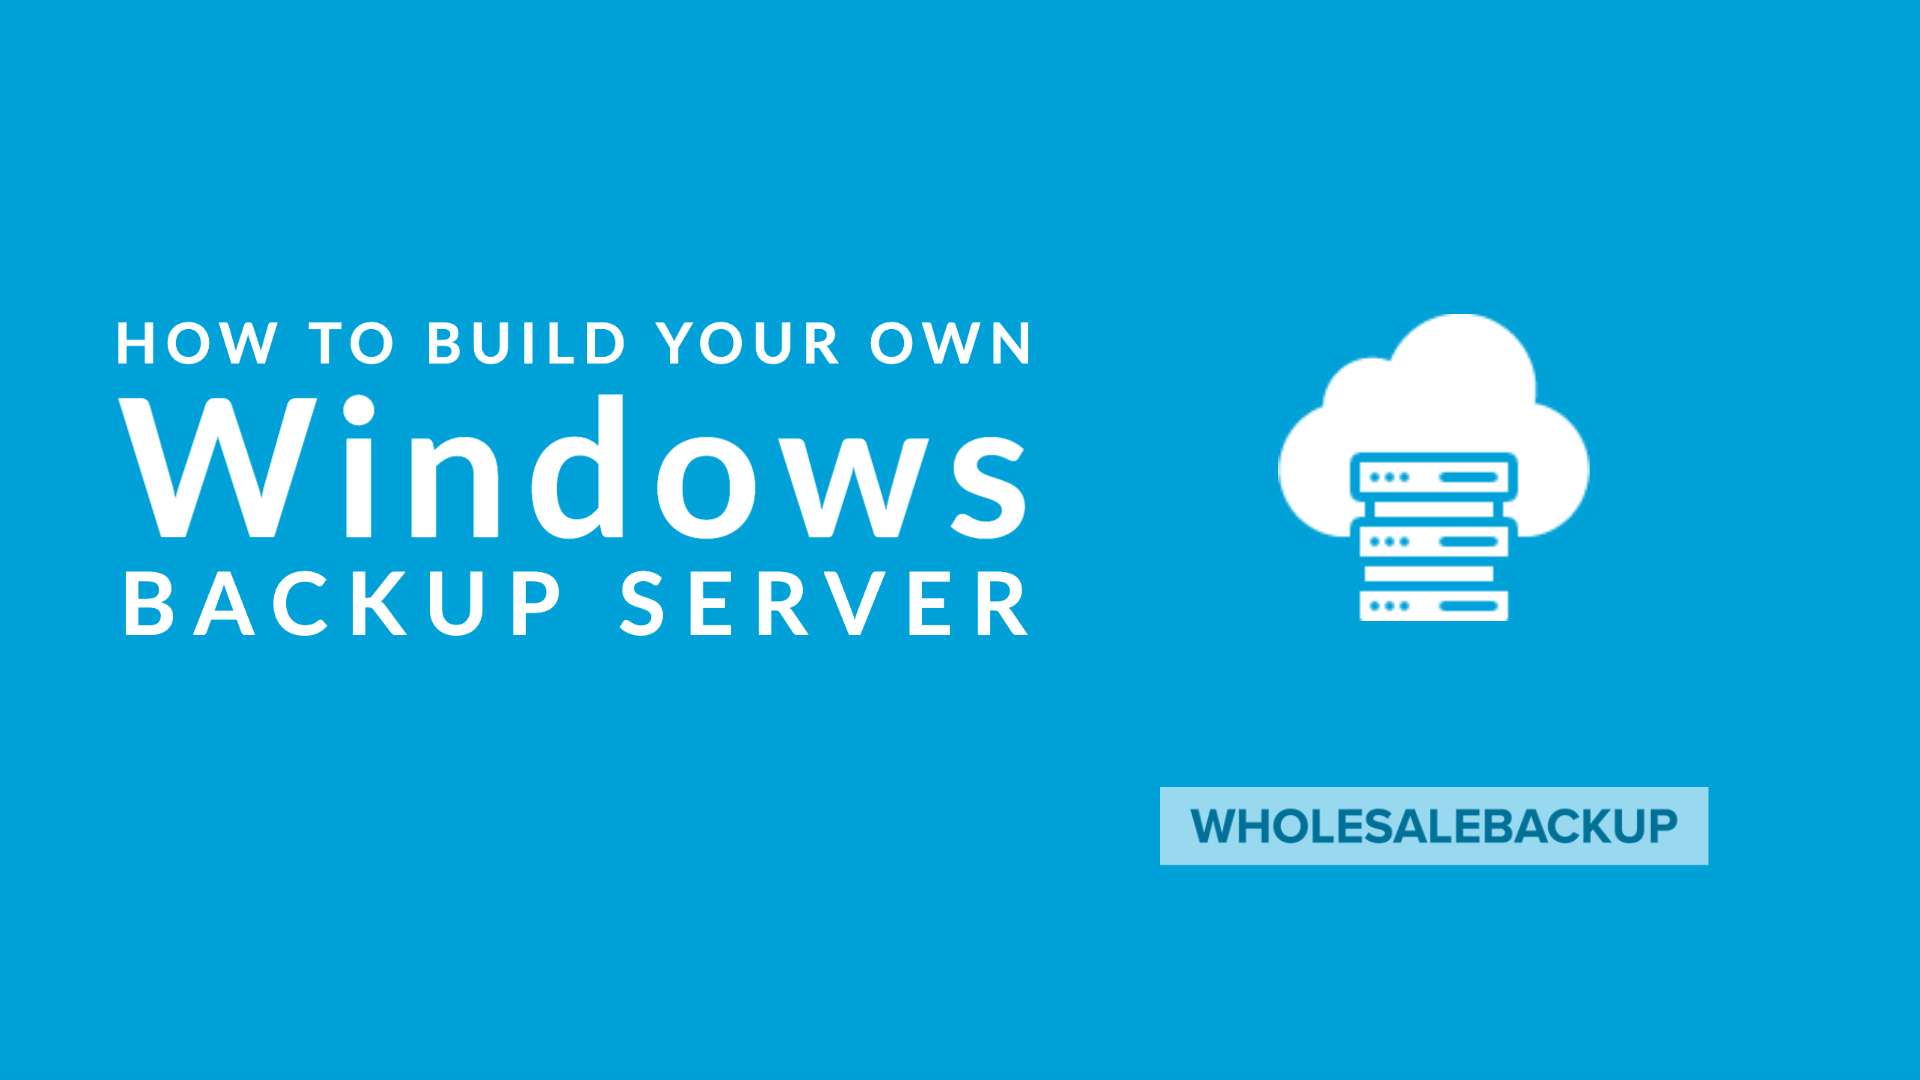 How to build your own Backup Server